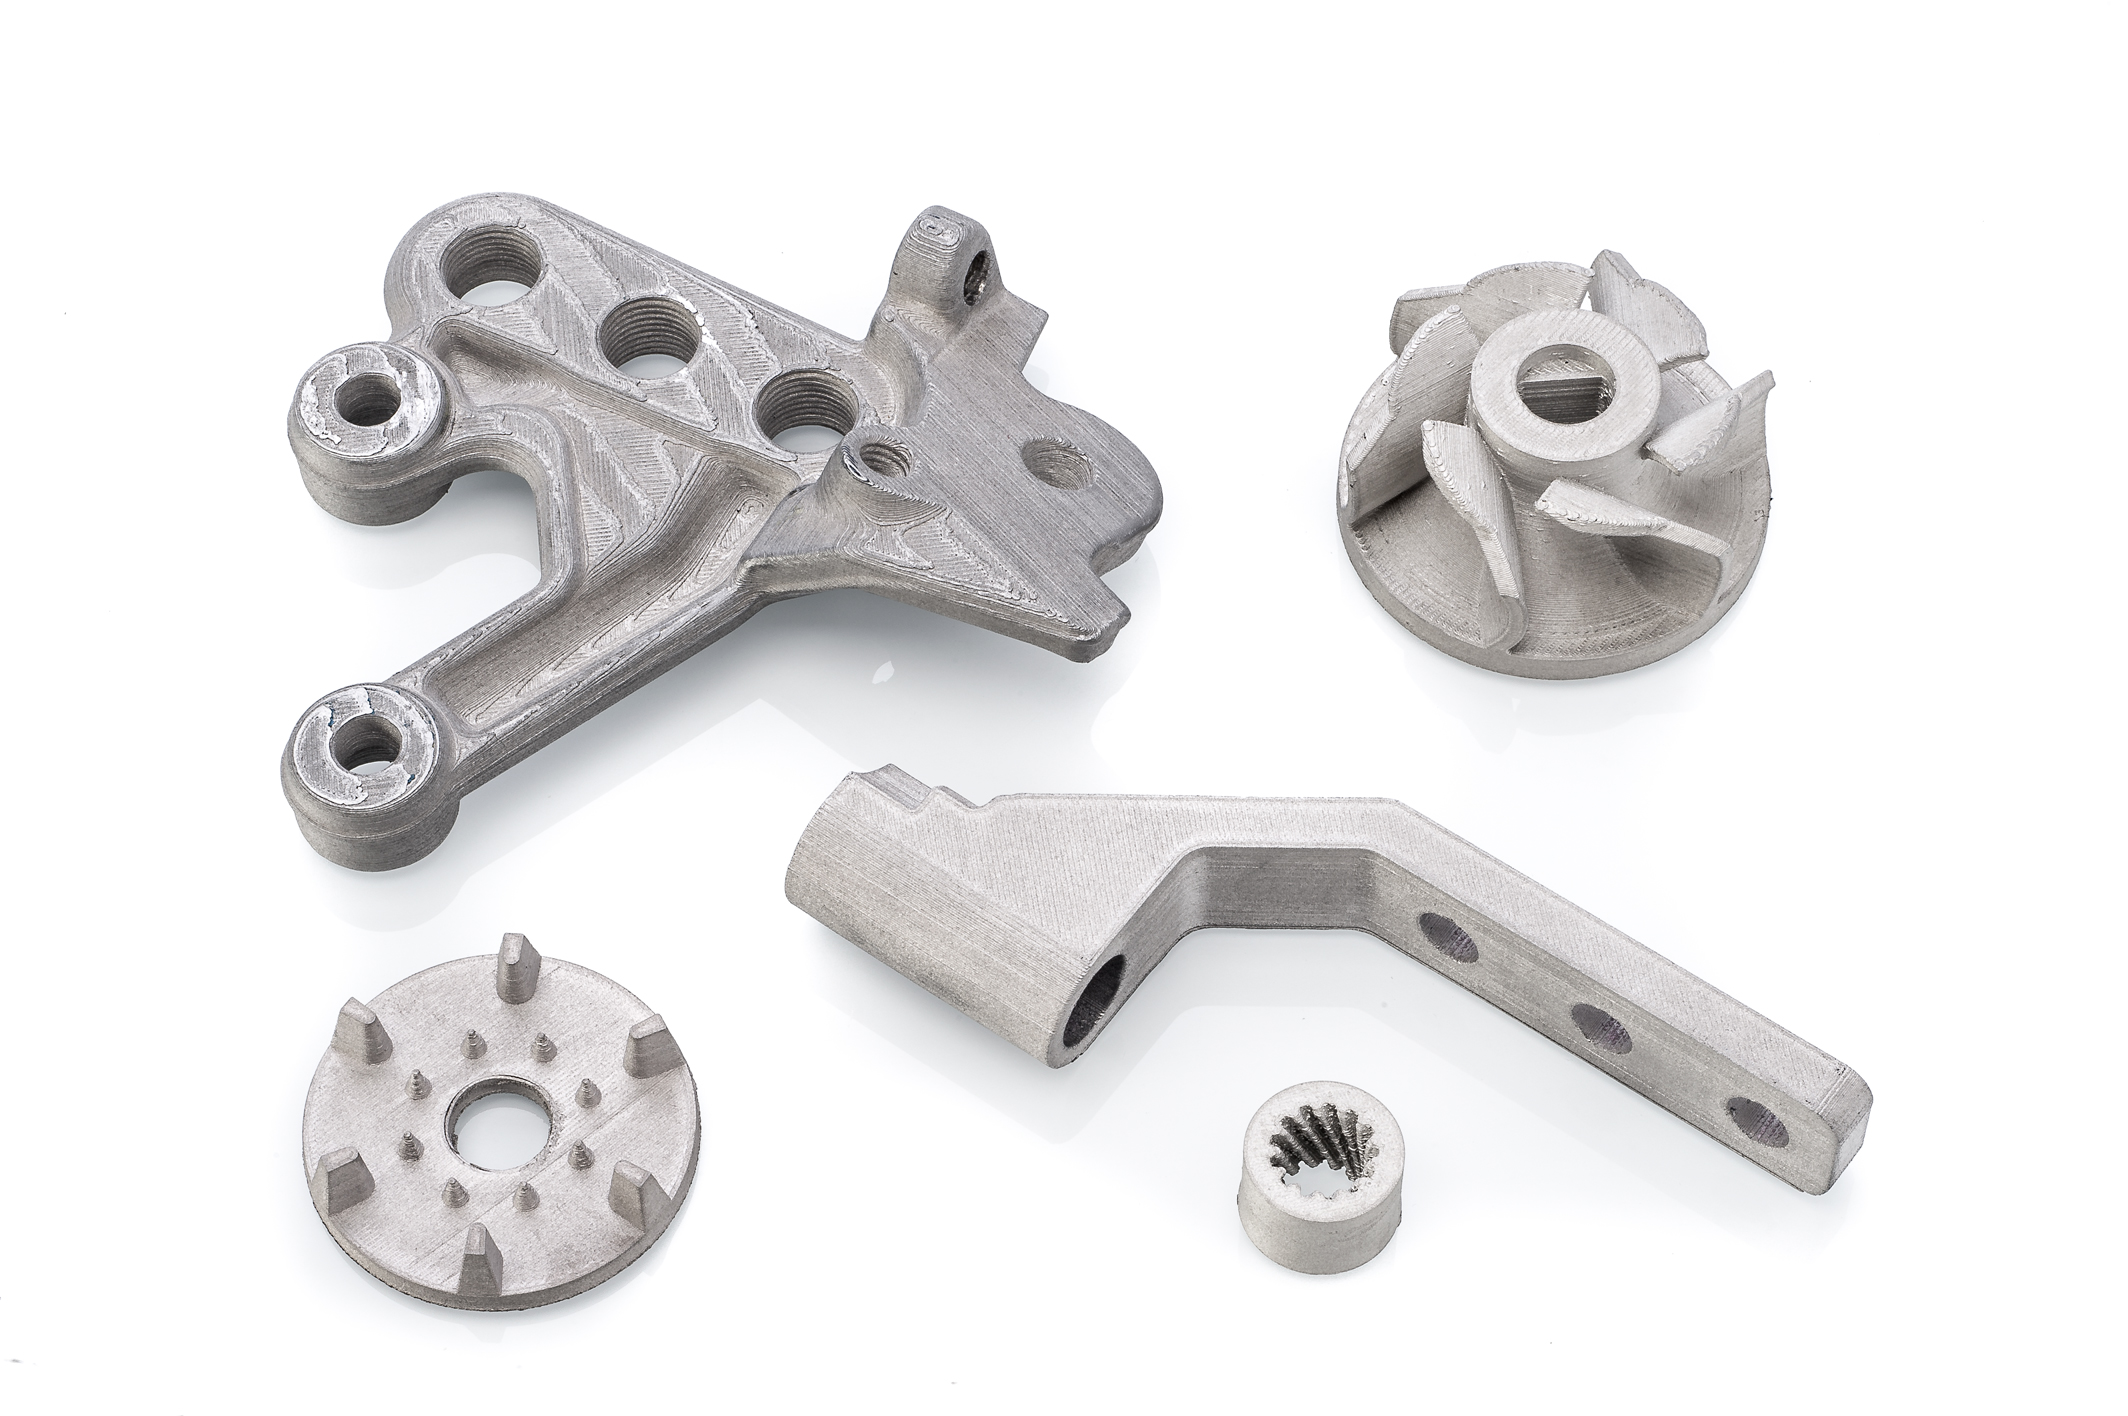 Applications 3D printed with the Ultimaker Metal FFF solution, including BASF Forward AM Ultrafuse® 17-4 PH and Ultrafuse® Support Layer filaments, resulting in strong parts with complex geometries. Photo via Ultimaker.